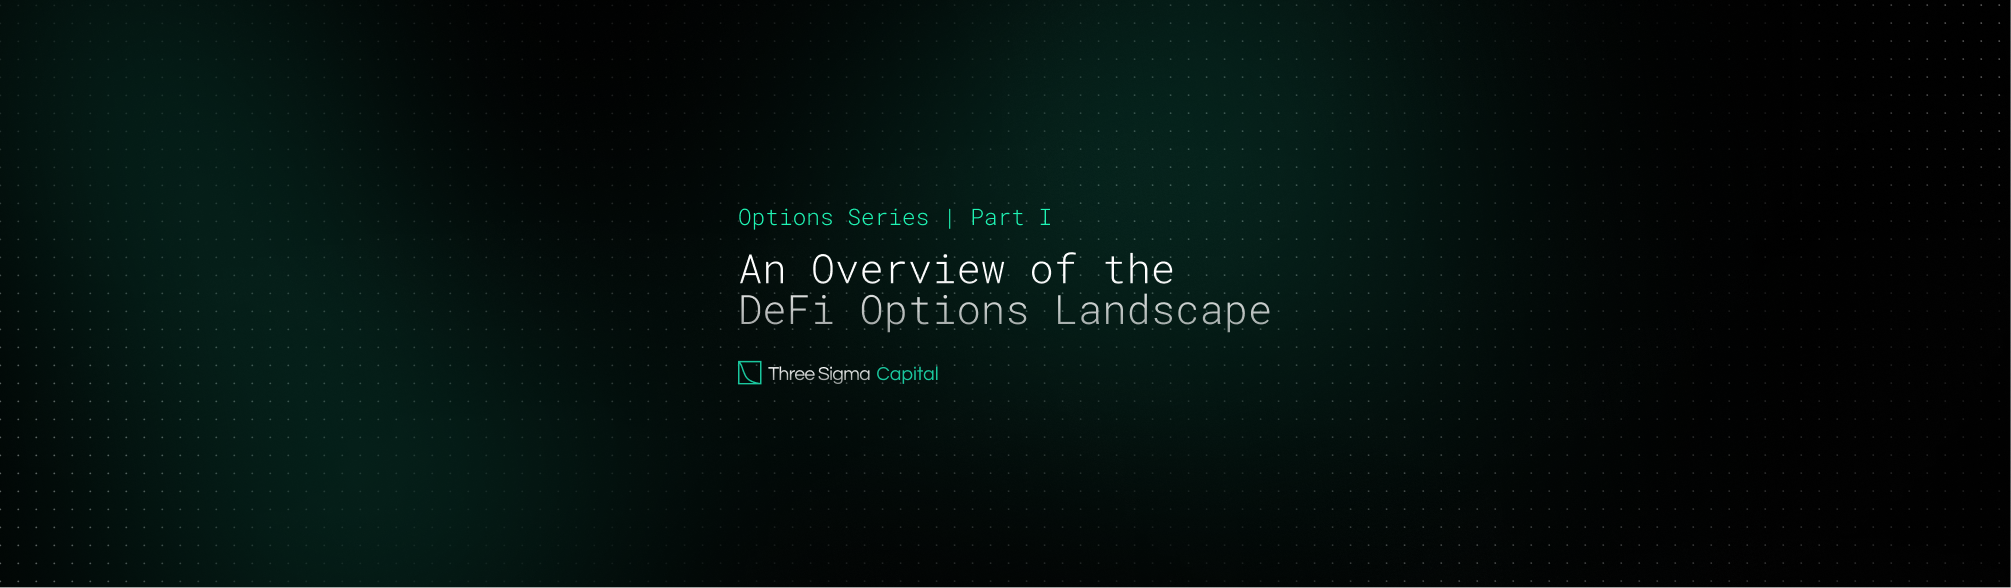 Cover Image for Options Series Part I - An Overview of the DeFi Options Landscape